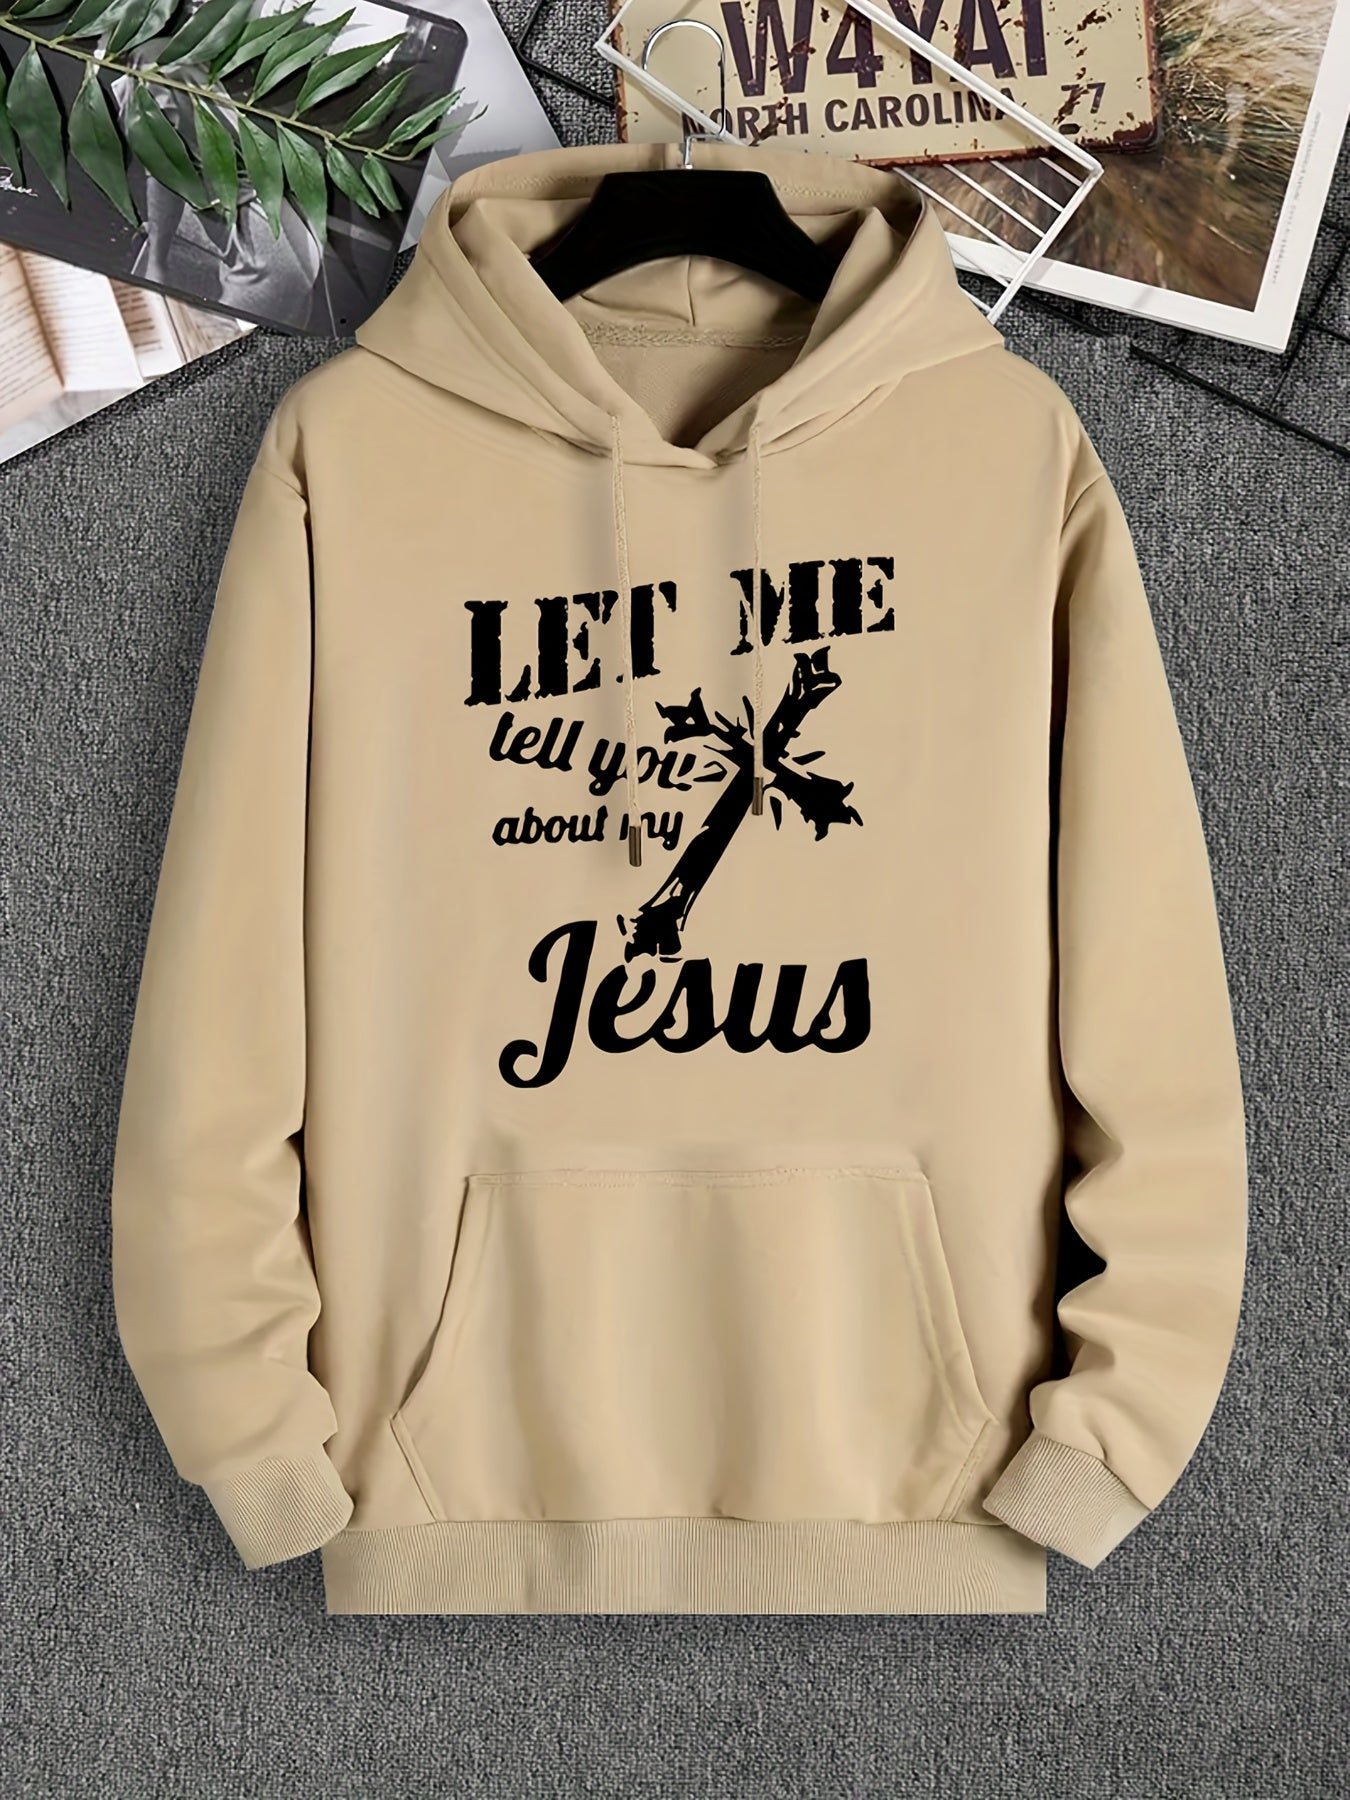 Let Me Tell You About My Jesus (2) Men's Christian Pullover Hooded Sweatshirt claimedbygoddesigns